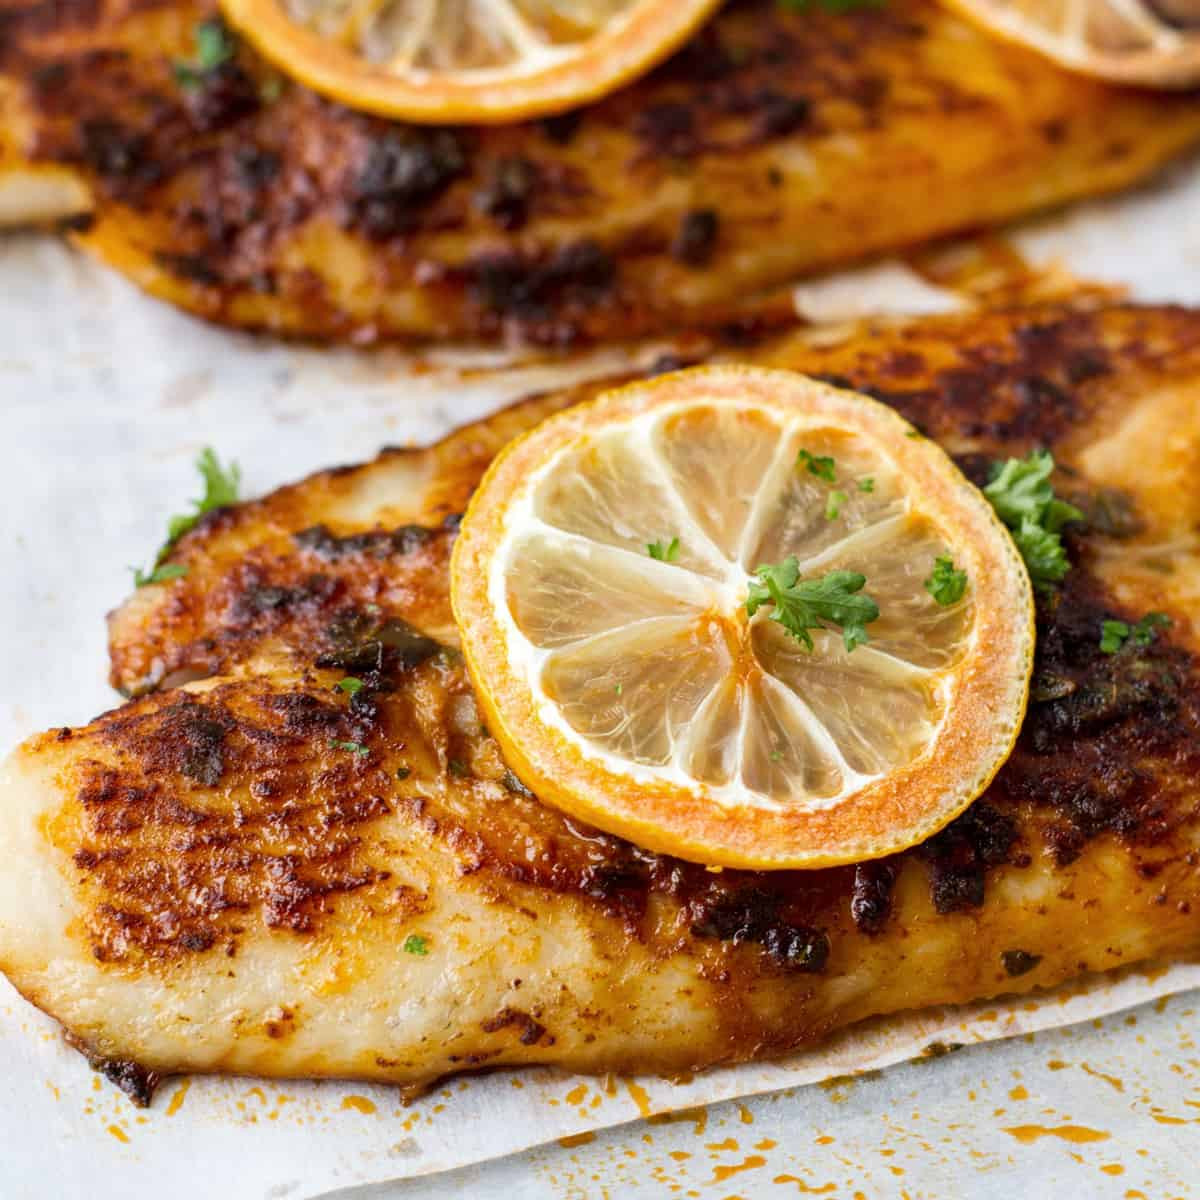 Recipes For Baking Fish Fillets
 Oven Baked Fish Basa Fillets Ilona s Passion